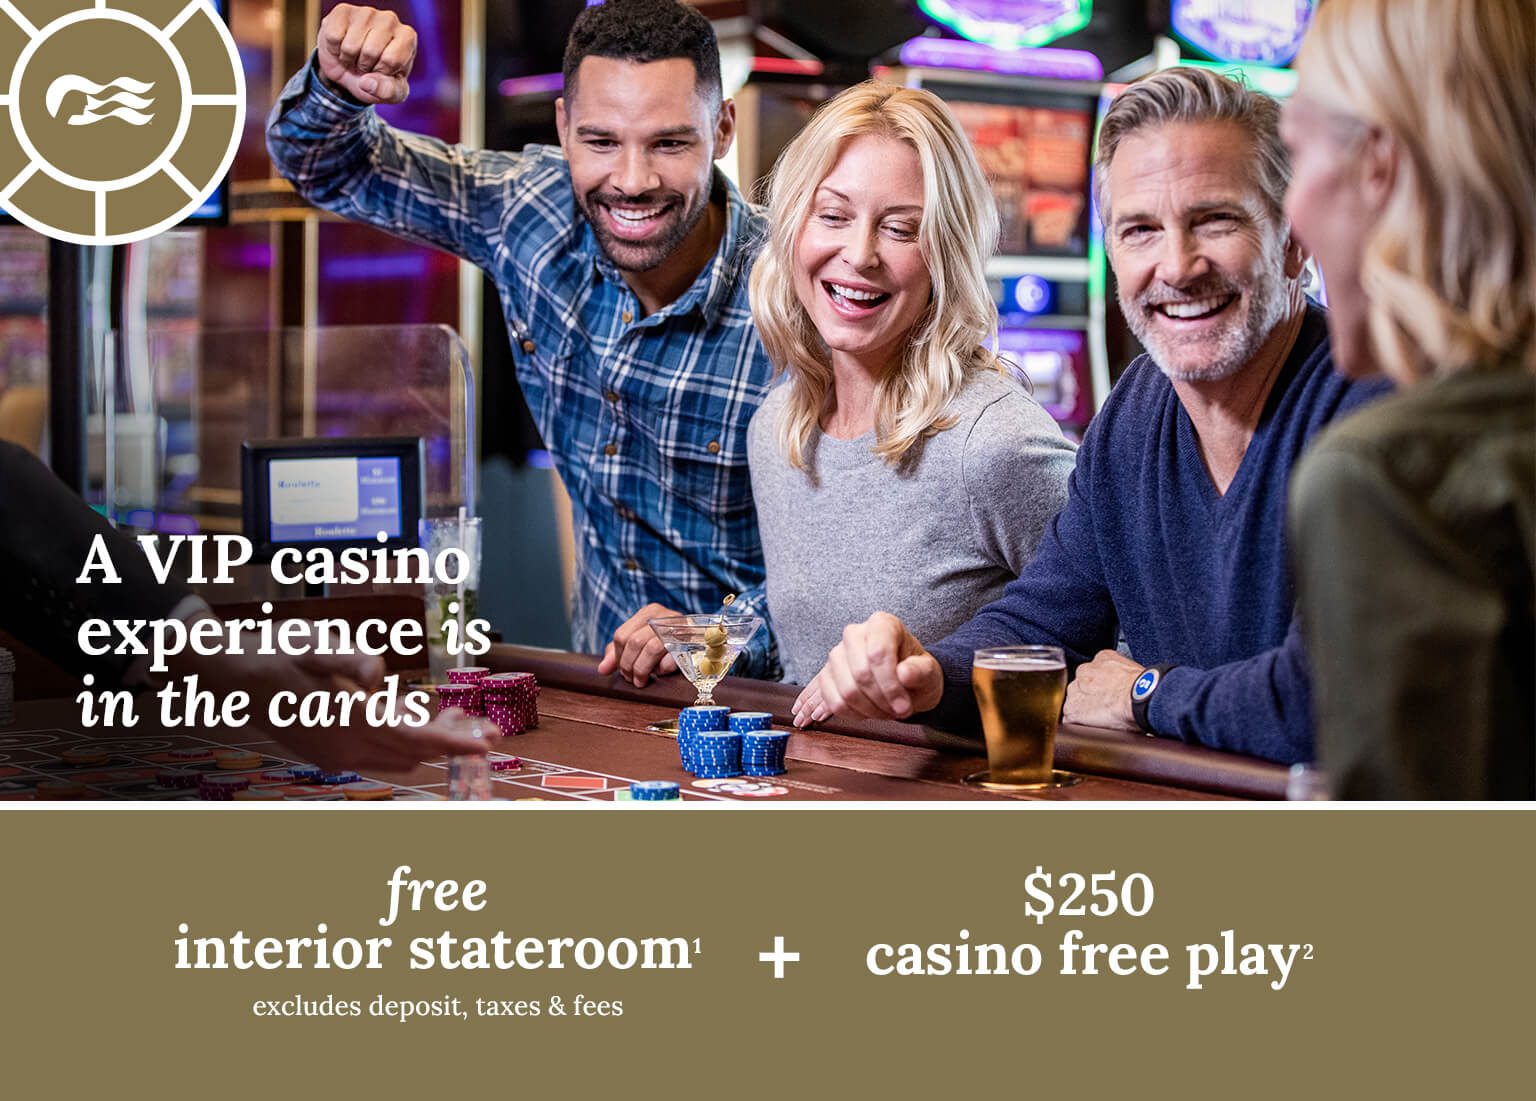 A VIP casino experience is in the cards. Free interior stateroom + $250 casino free play + princess plus with drinks, Wi-Fi, and crew appreciation included. Click here to book.